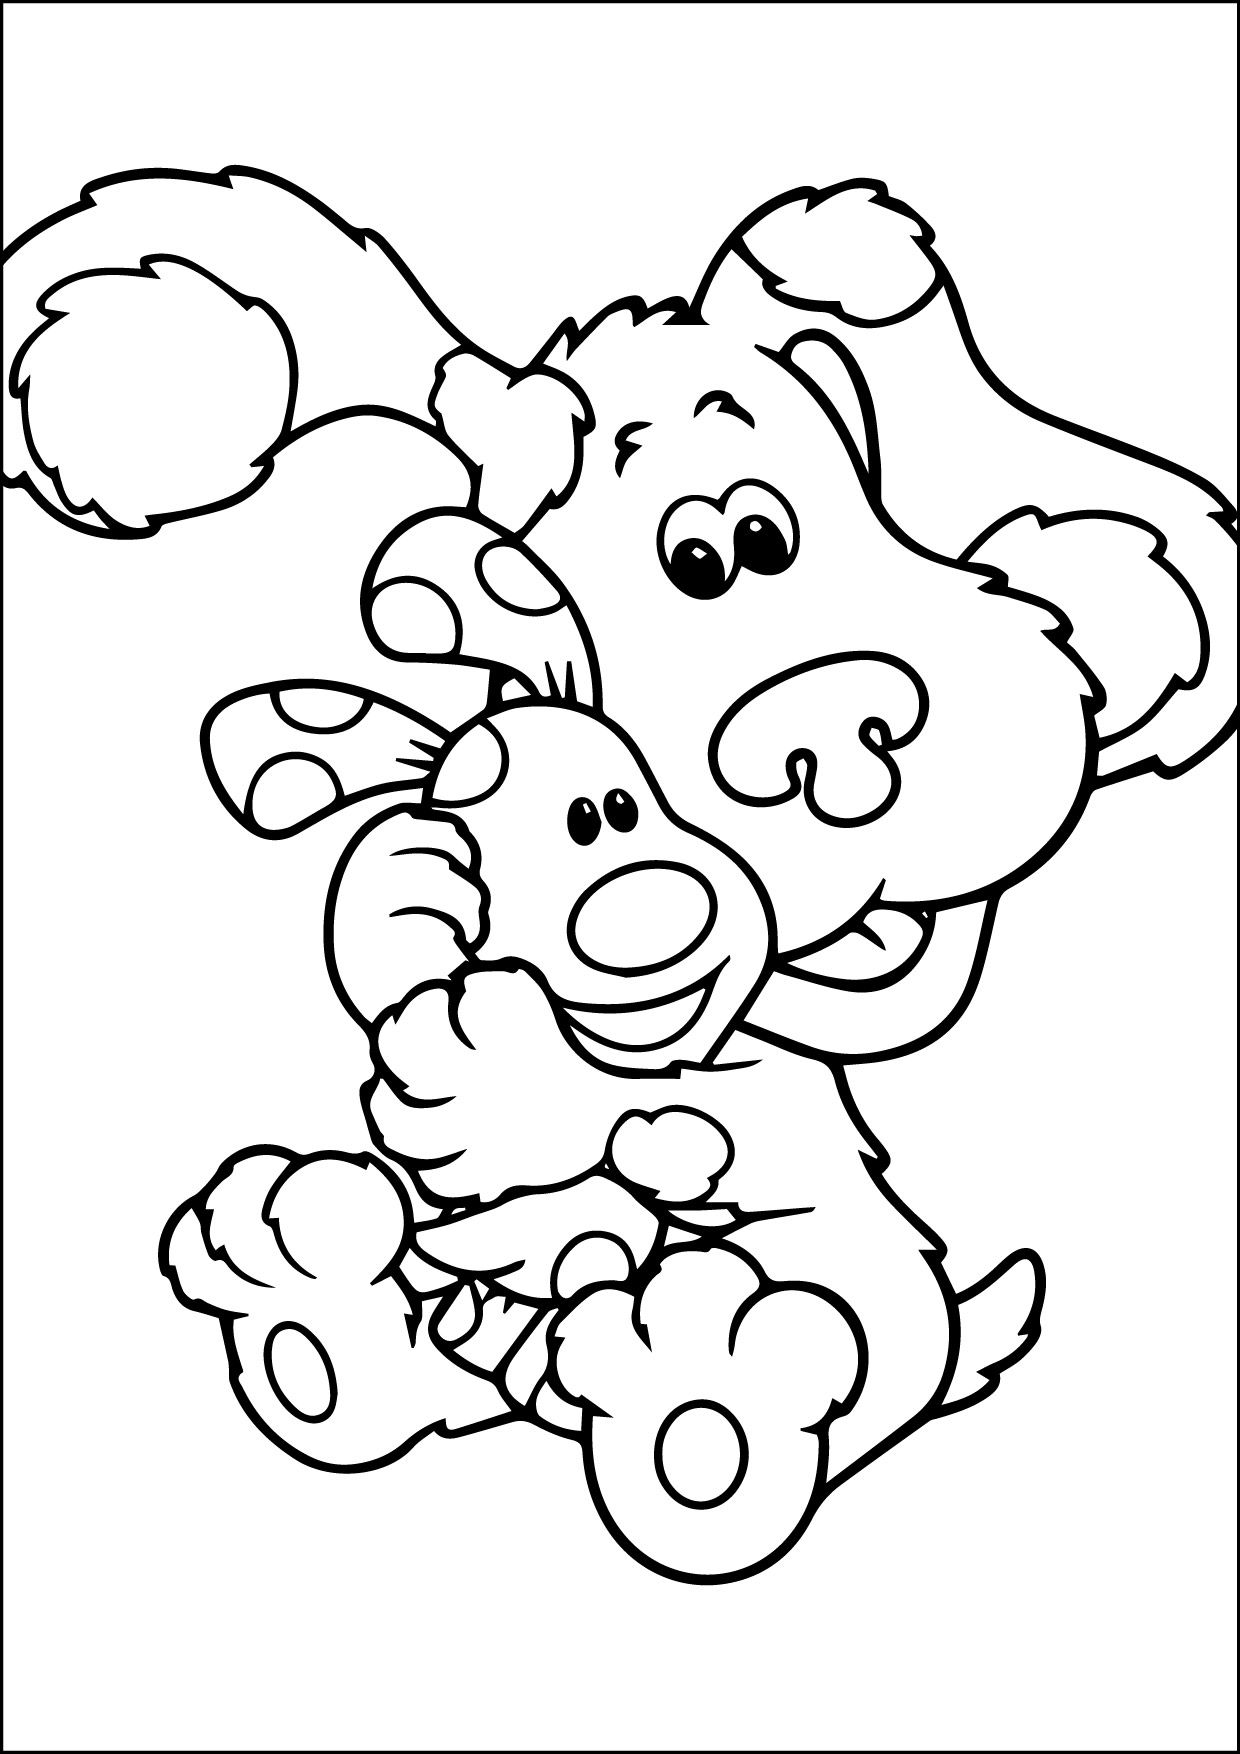 blues-clues-printable-coloring-pages-at-getcolorings-free-printable-colorings-pages-to